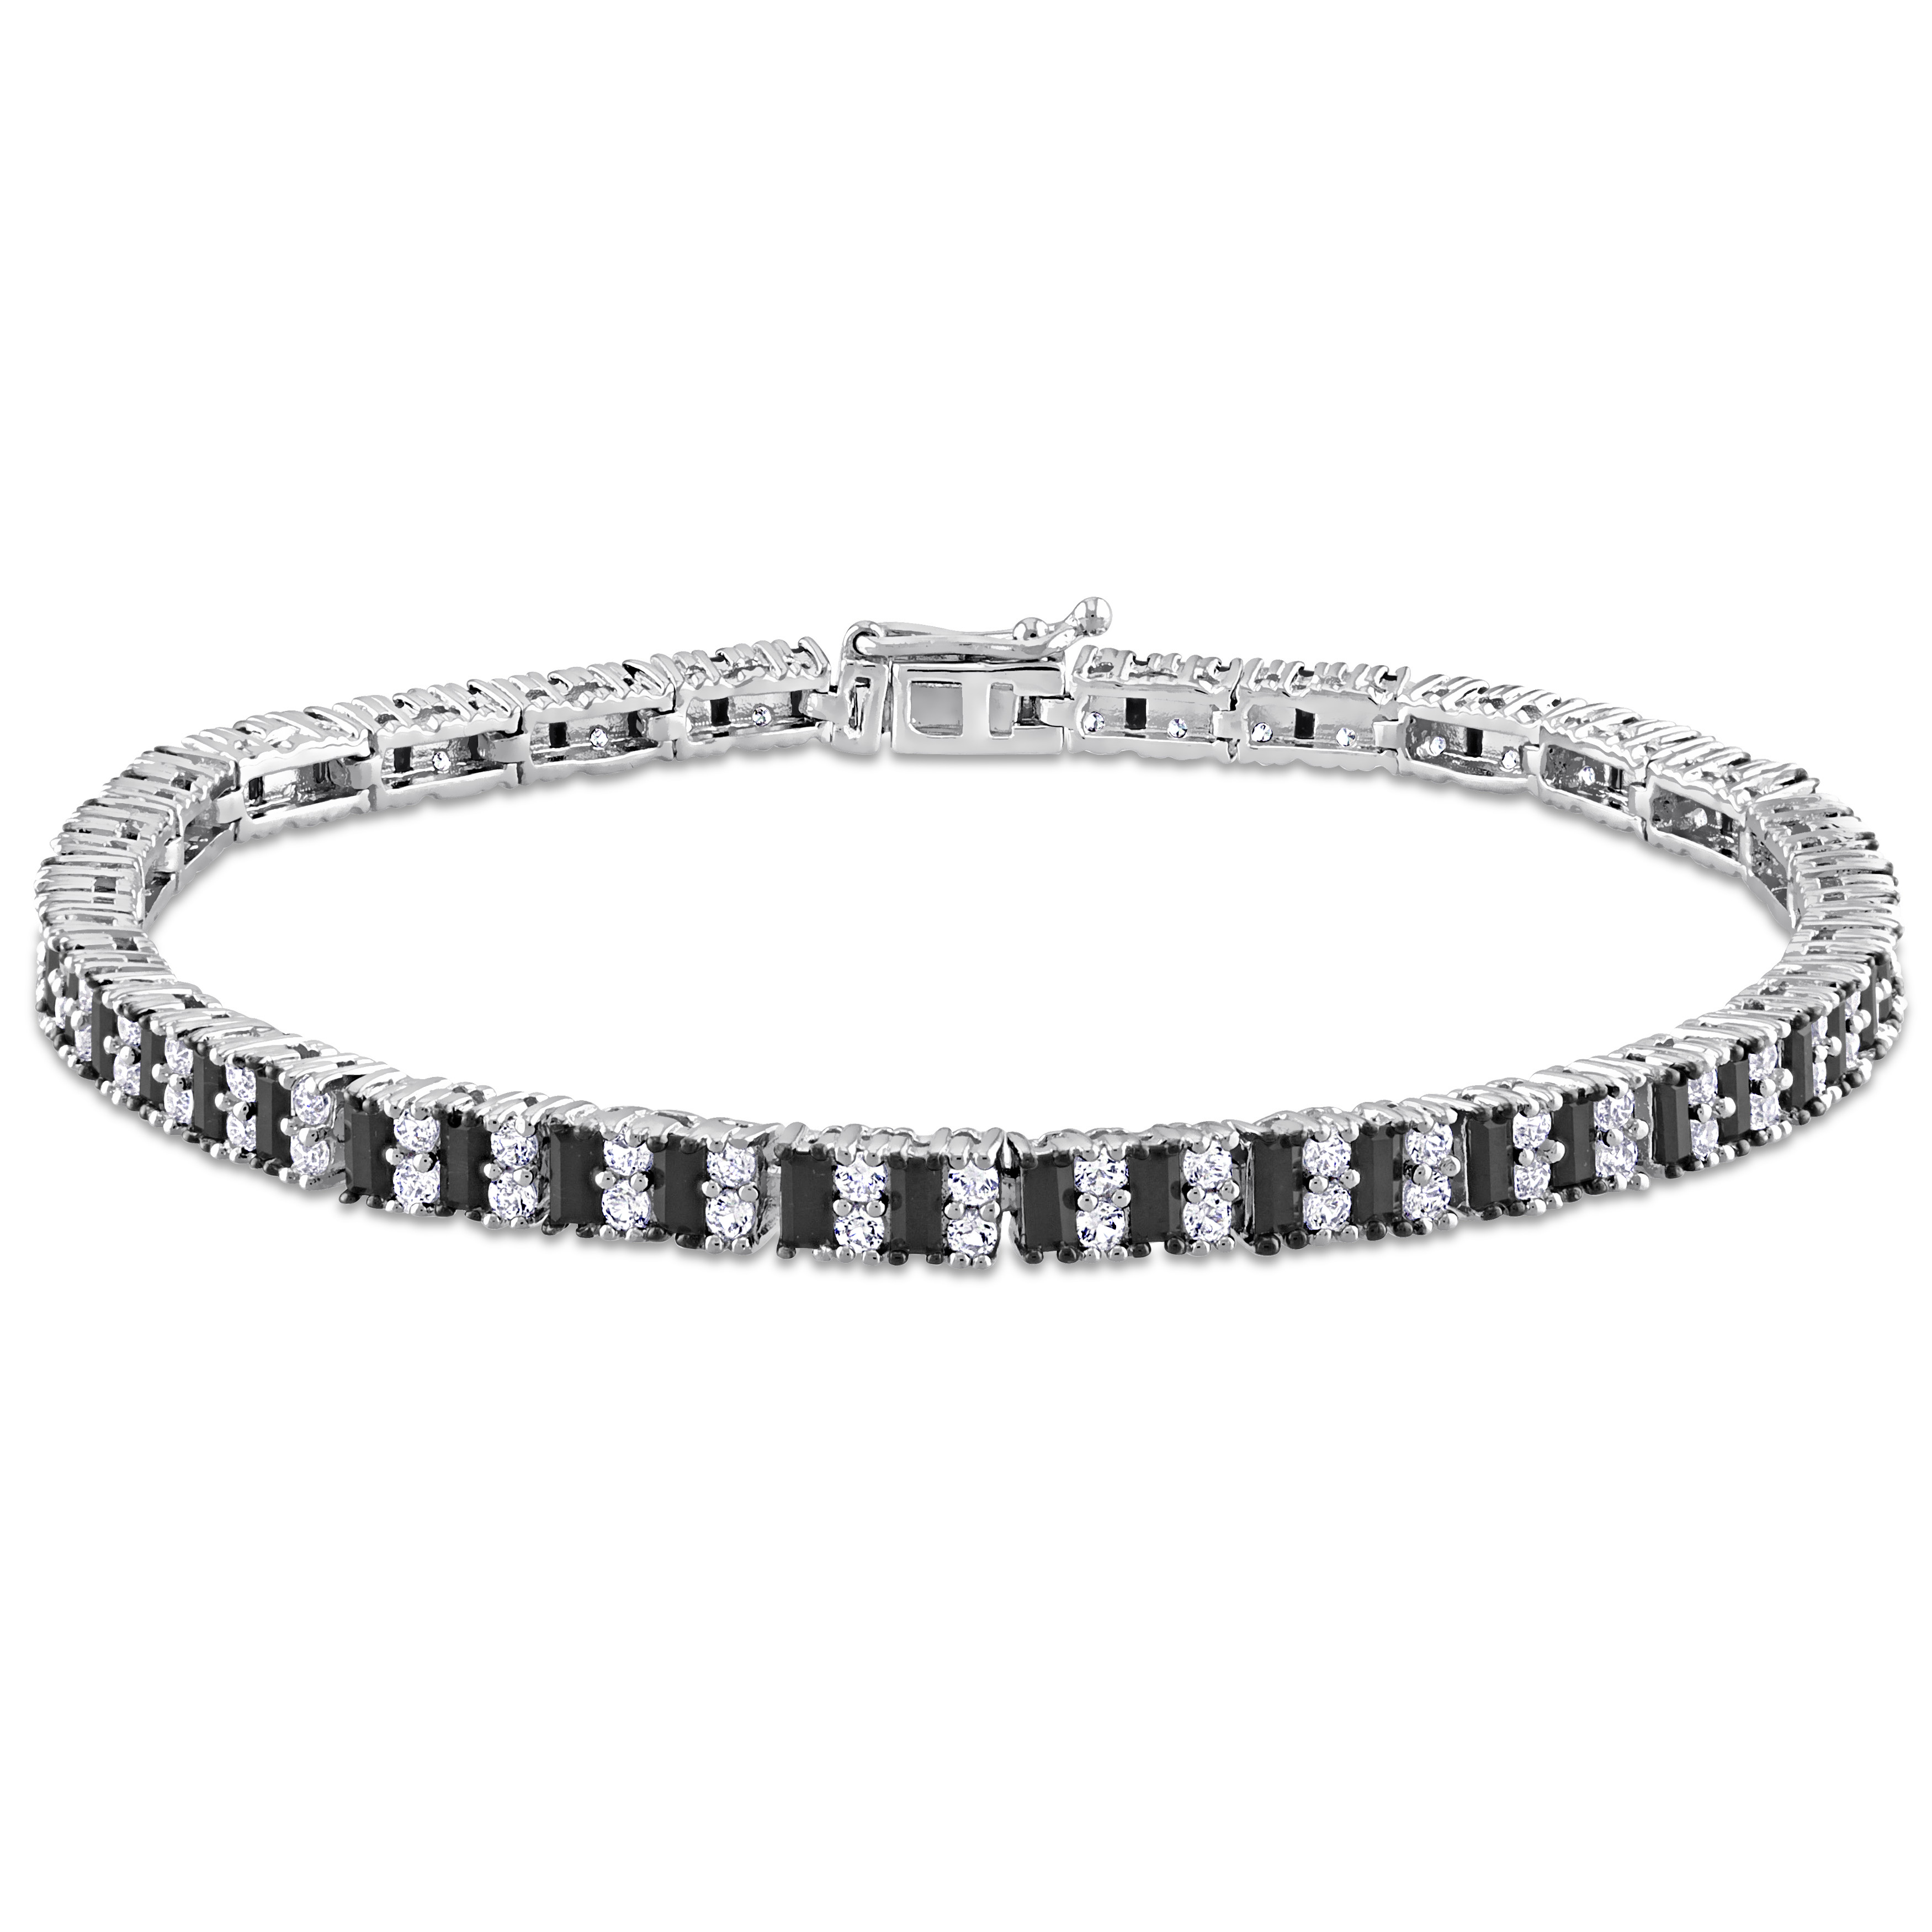 7 3/5 CT TGW Baguette-Cut Black Spinel and Created White Sapphire Tennis Bracelet in Sterling Silver - 7.25 in.